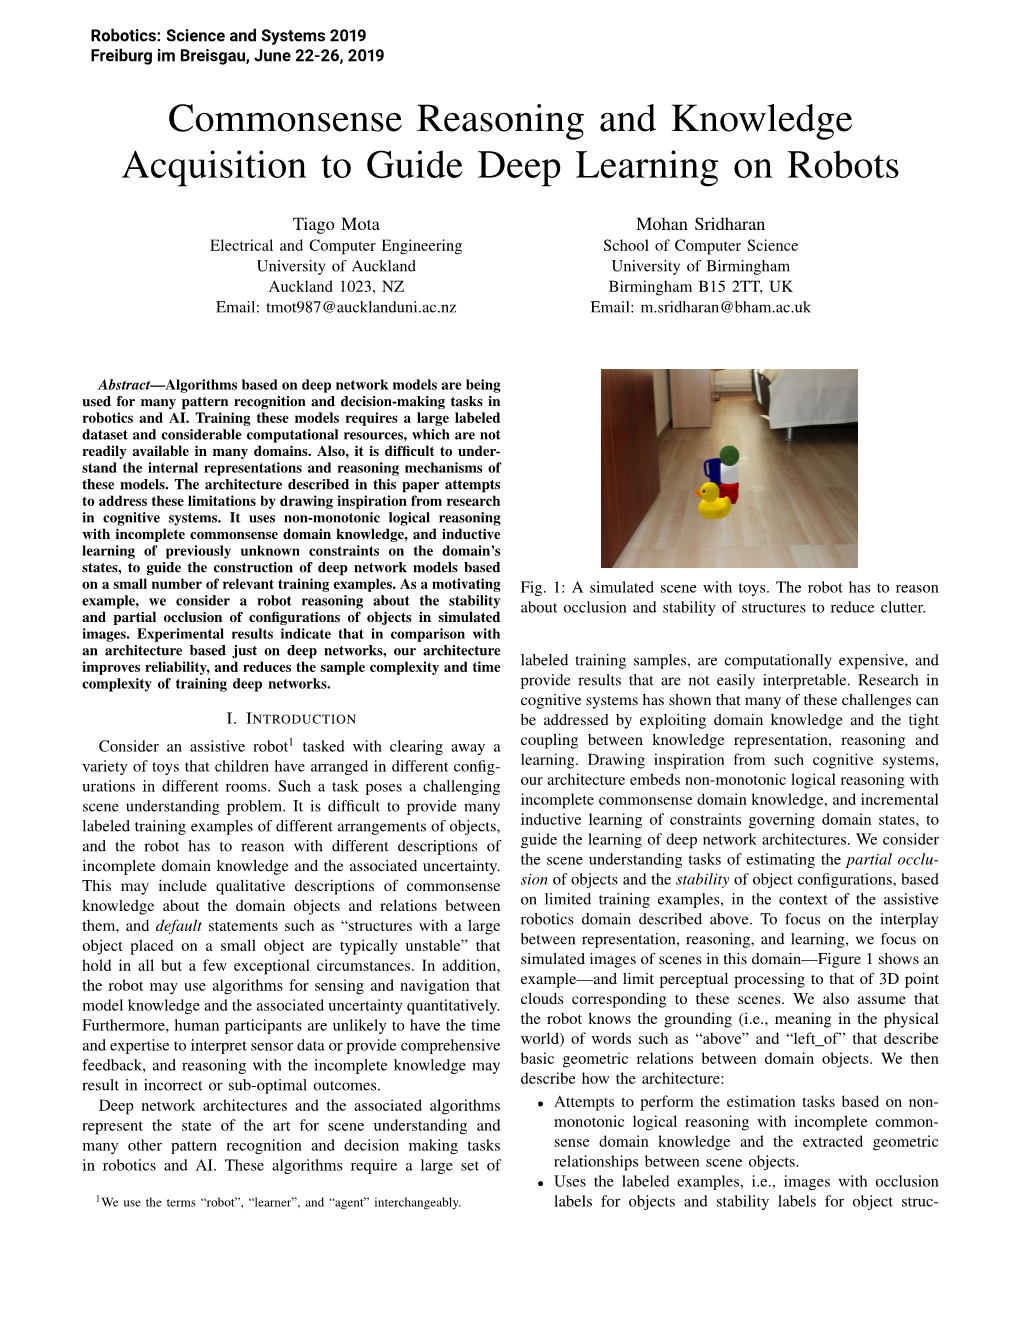 Commonsense Reasoning and Knowledge Acquisition to Guide Deep Learning on Robots